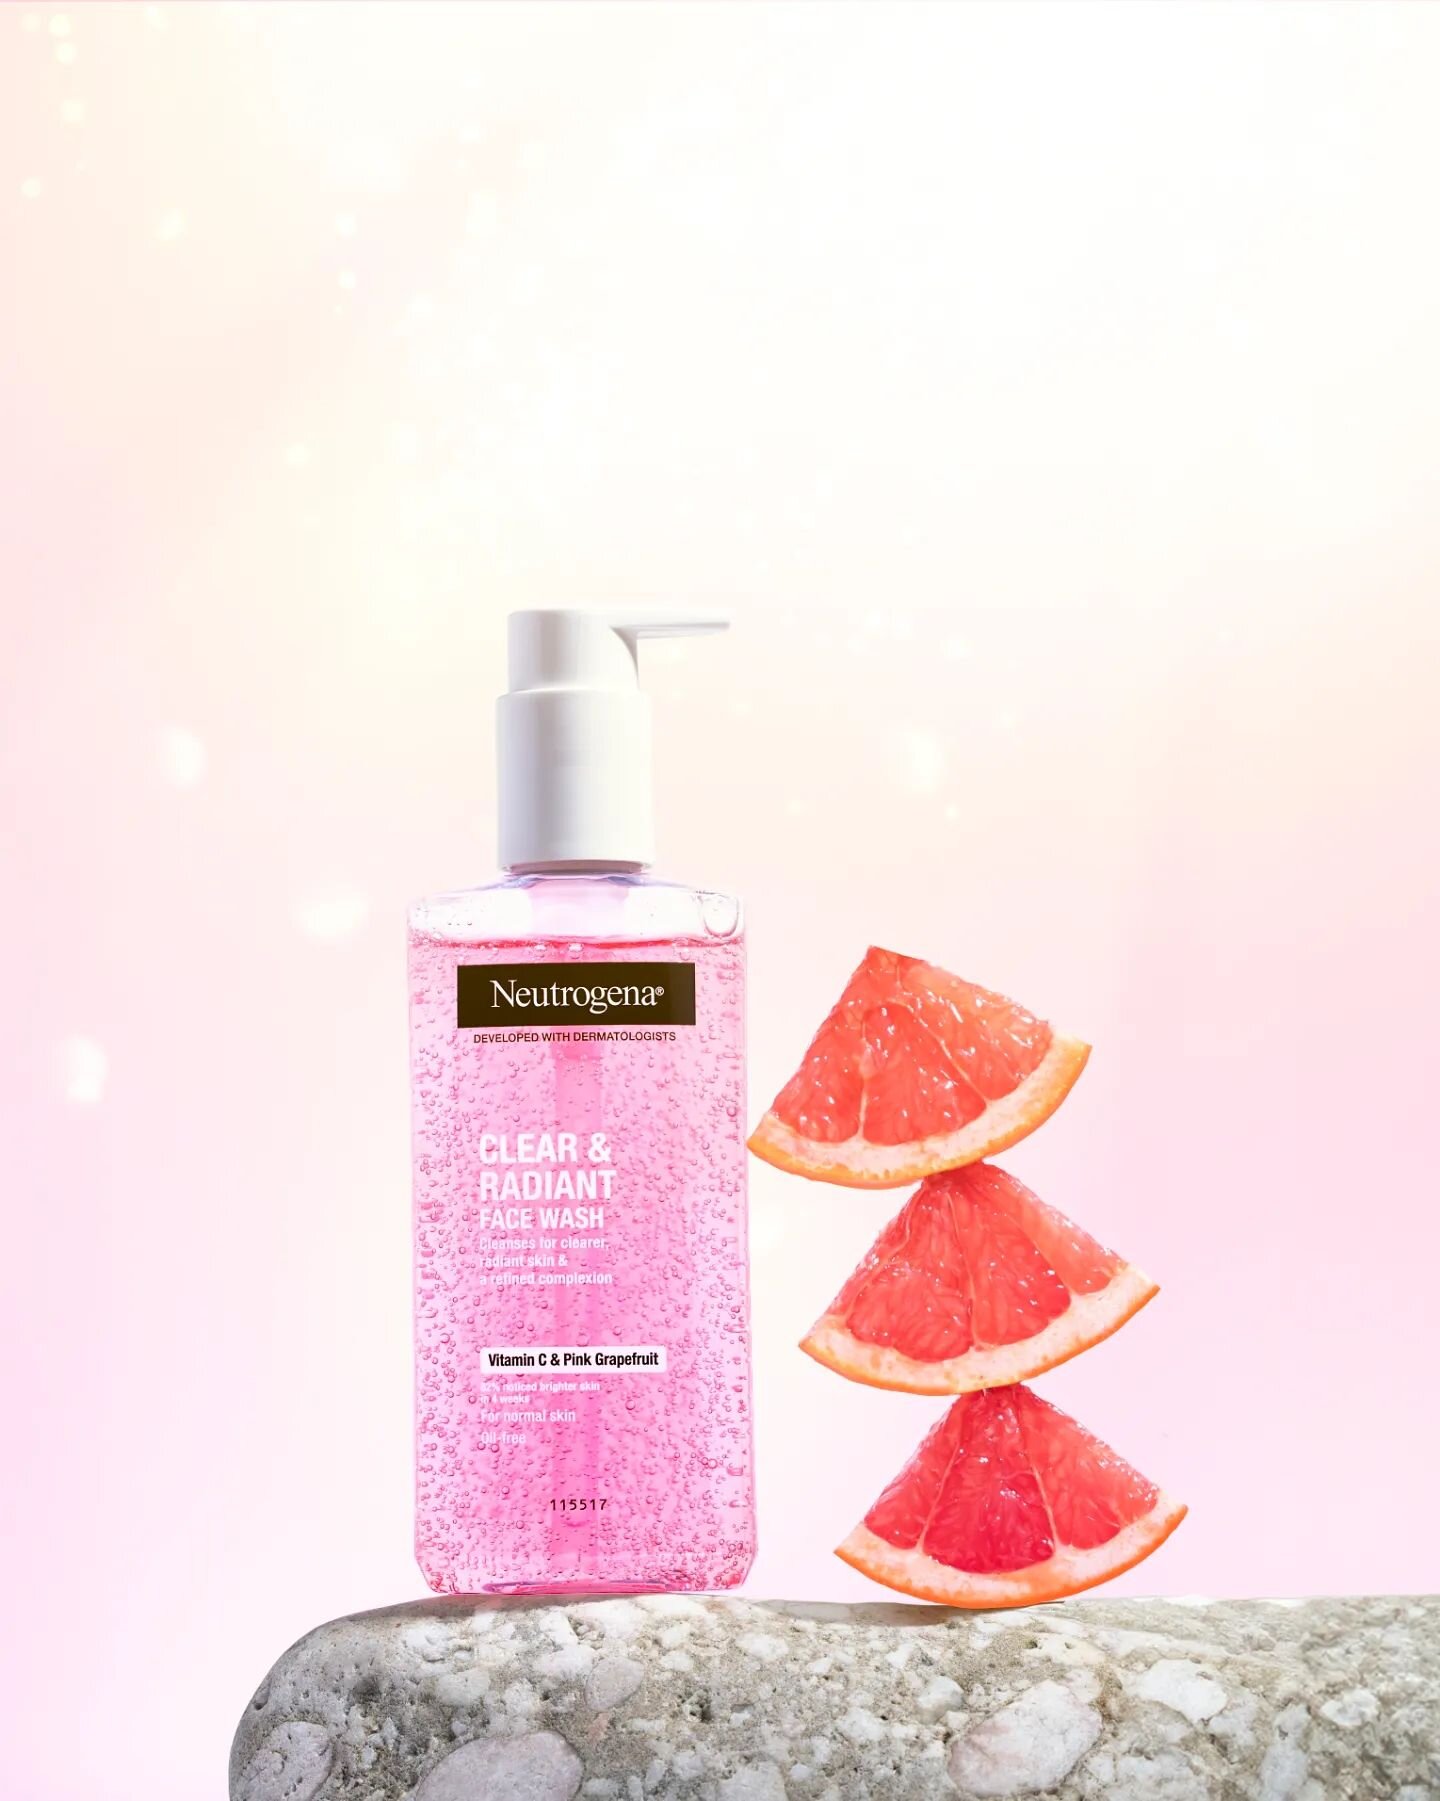 Givin' @neutrogena a glow up ✨

Balanced these grapefruit triangles using a cocktail stick and a lot of tears... 👌
&bull;
&bull;
&bull;
#productphotography #neutrogena #facewash #cosmeticsphotography #conceptualphotography #creativephotography #fsto